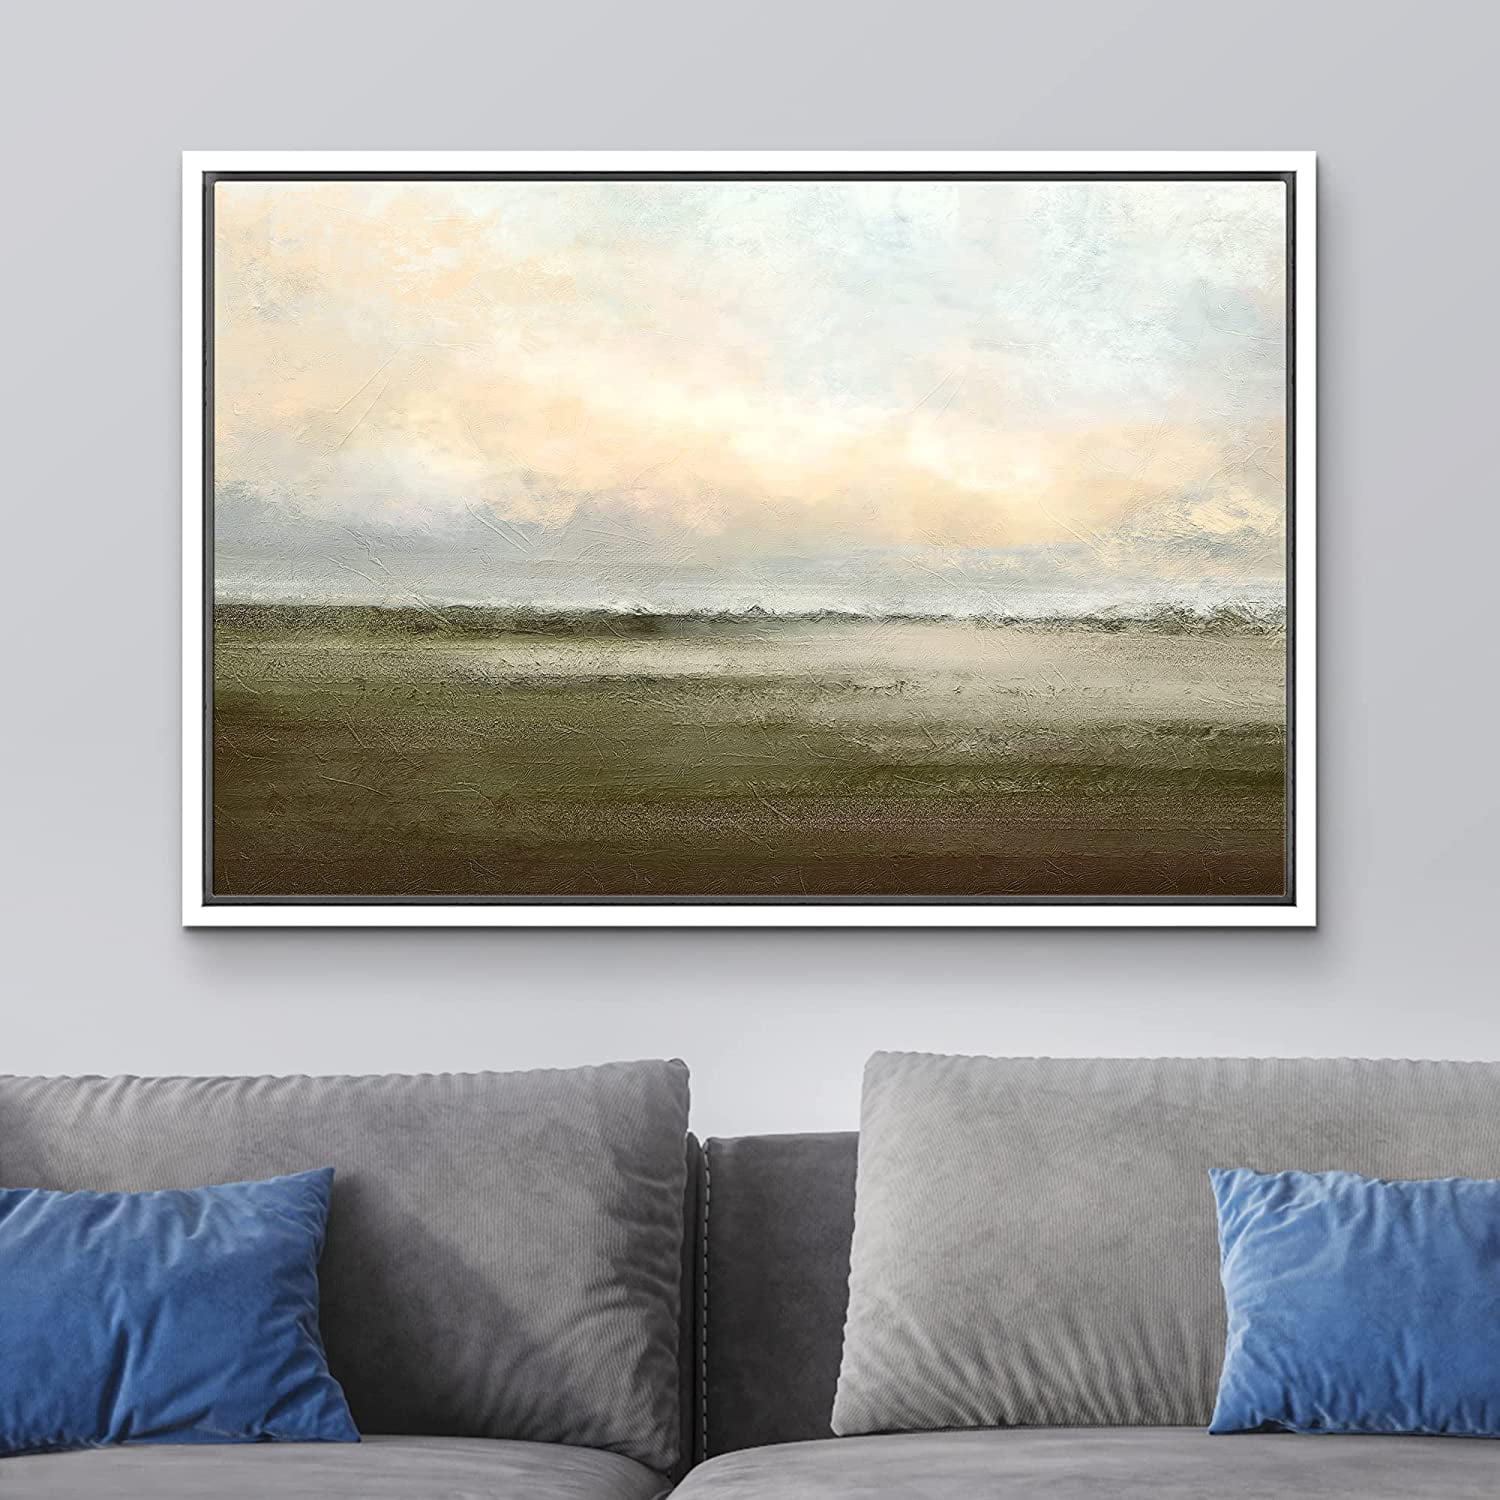 wall26 Framed Canvas Print Wall Art Watercolor Dusk Sky Over Green Field  Nature Wilderness Illustrations Modern Rustic Relax/Calm Cool for Living  Room, Bedroom, Office 16x24 White